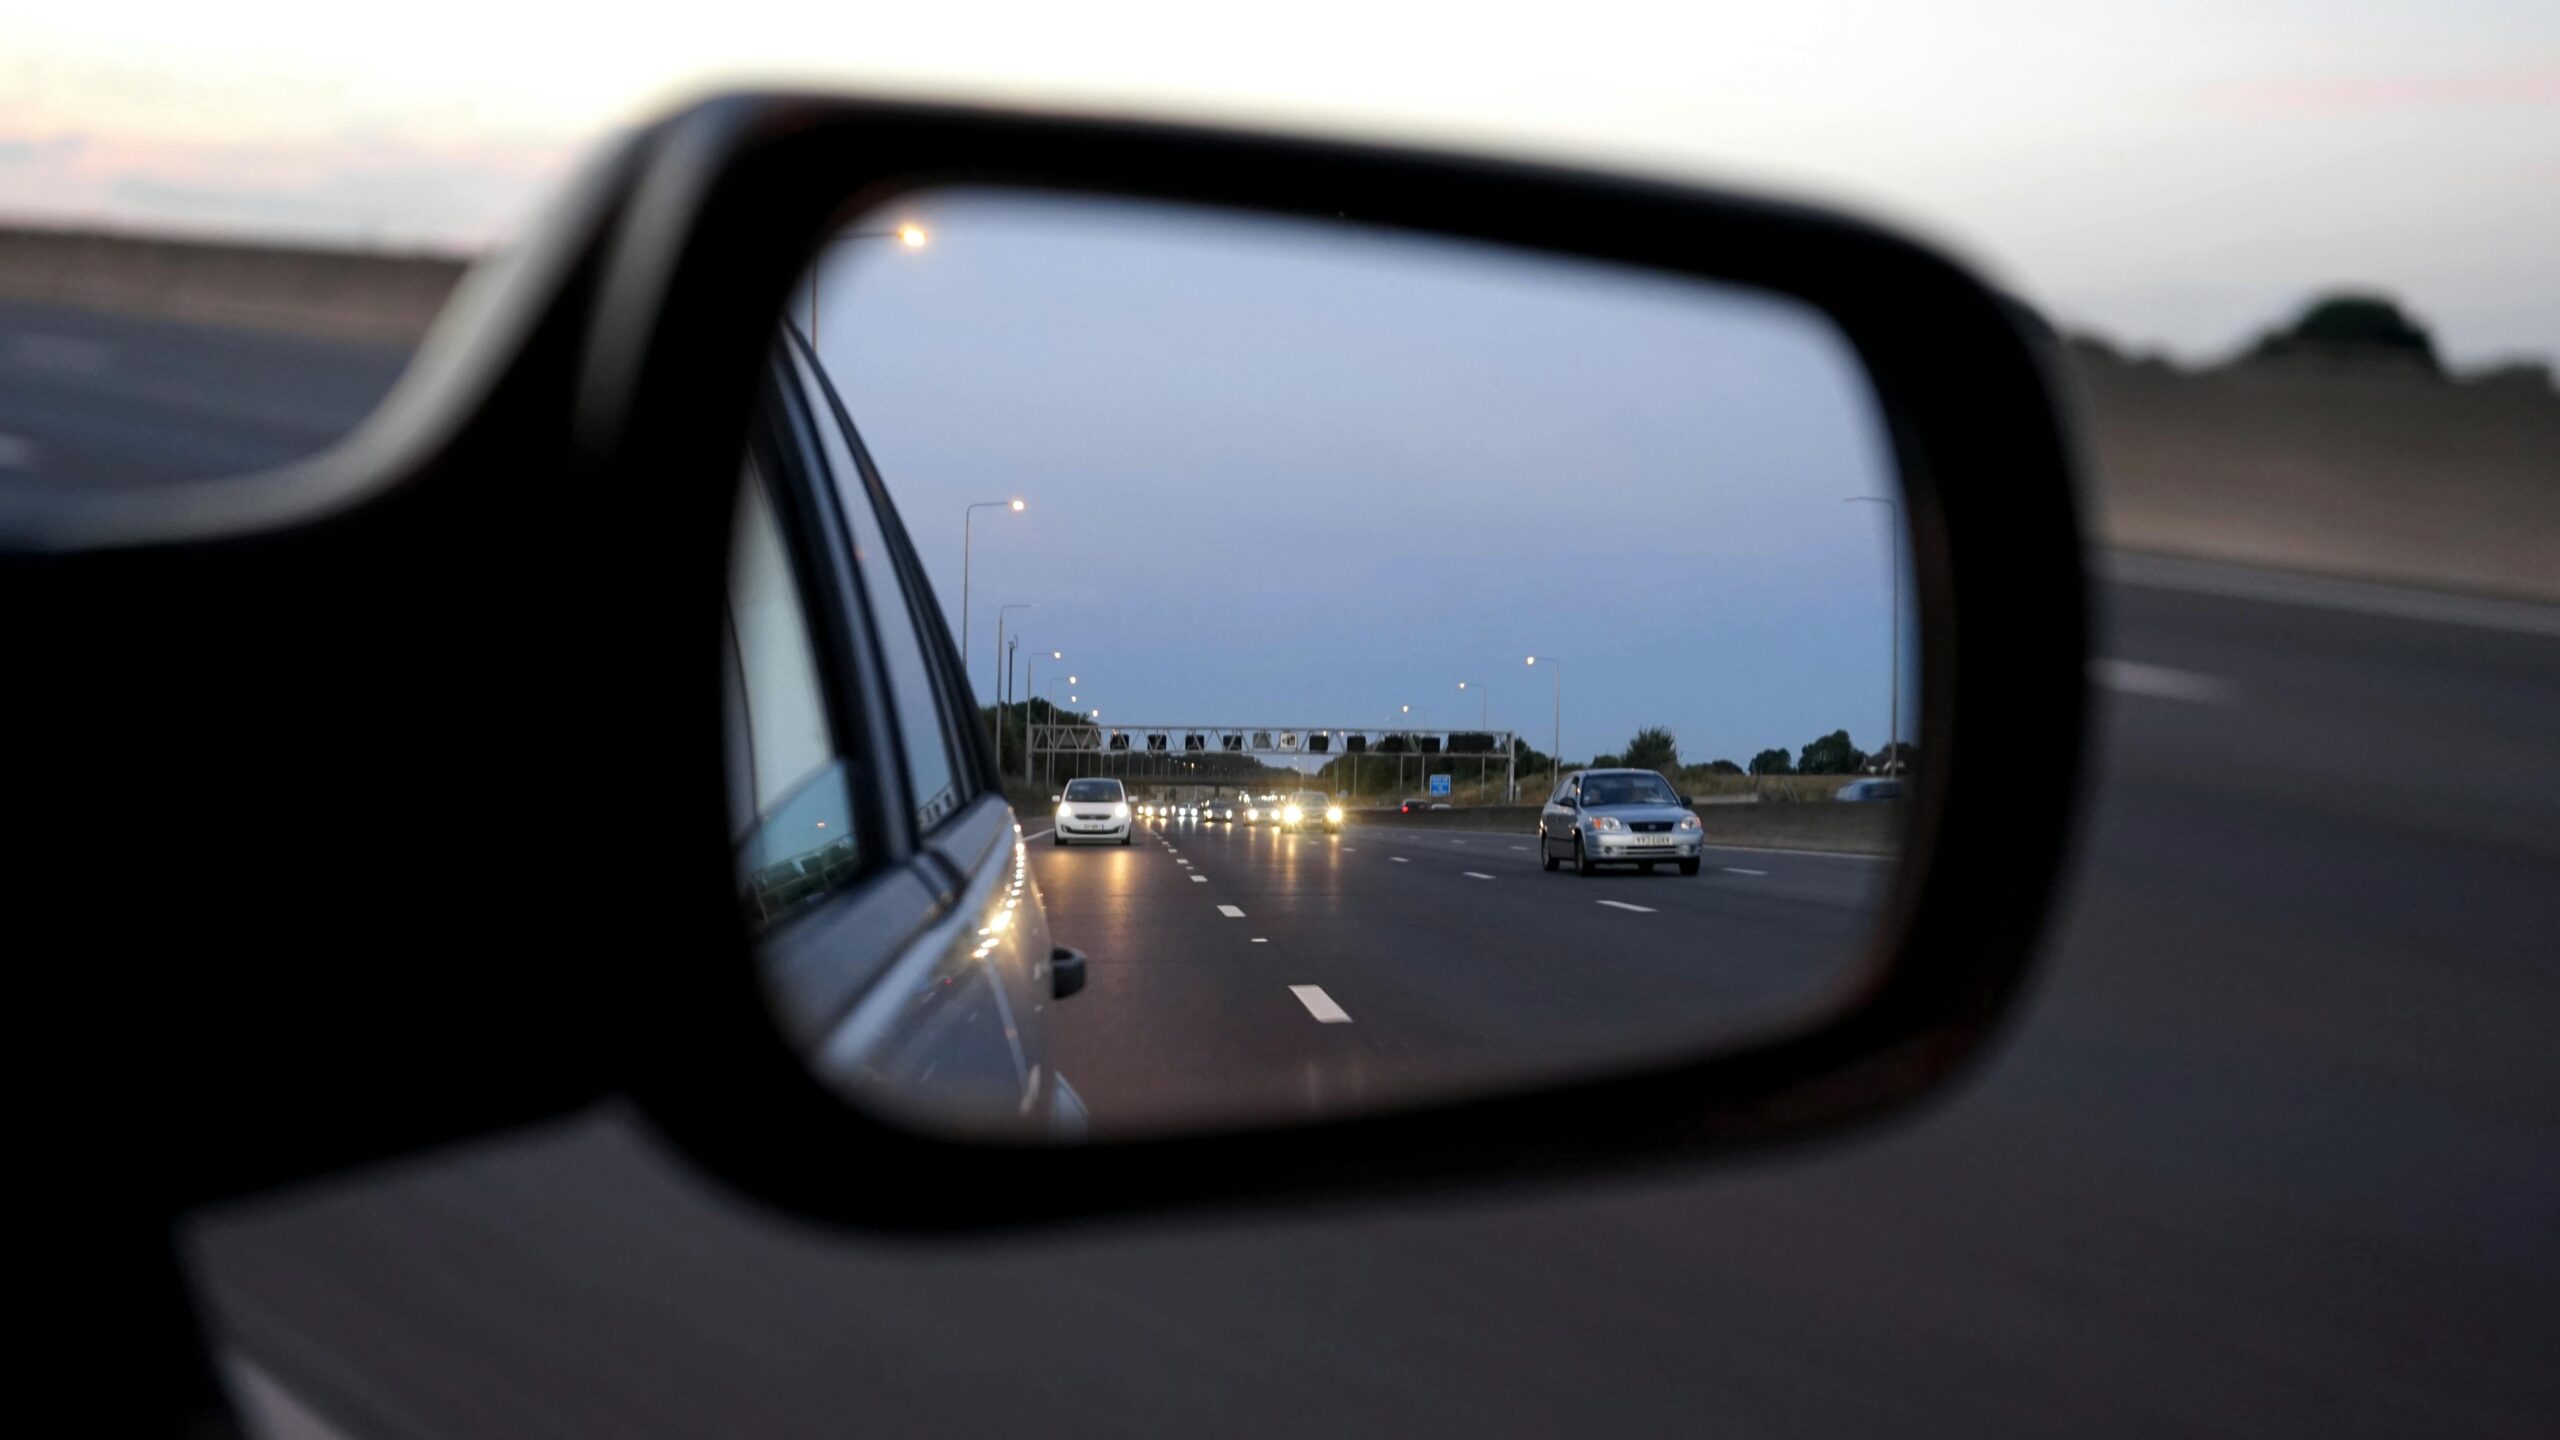 Image of side mirror of a car with the reflection of a road.